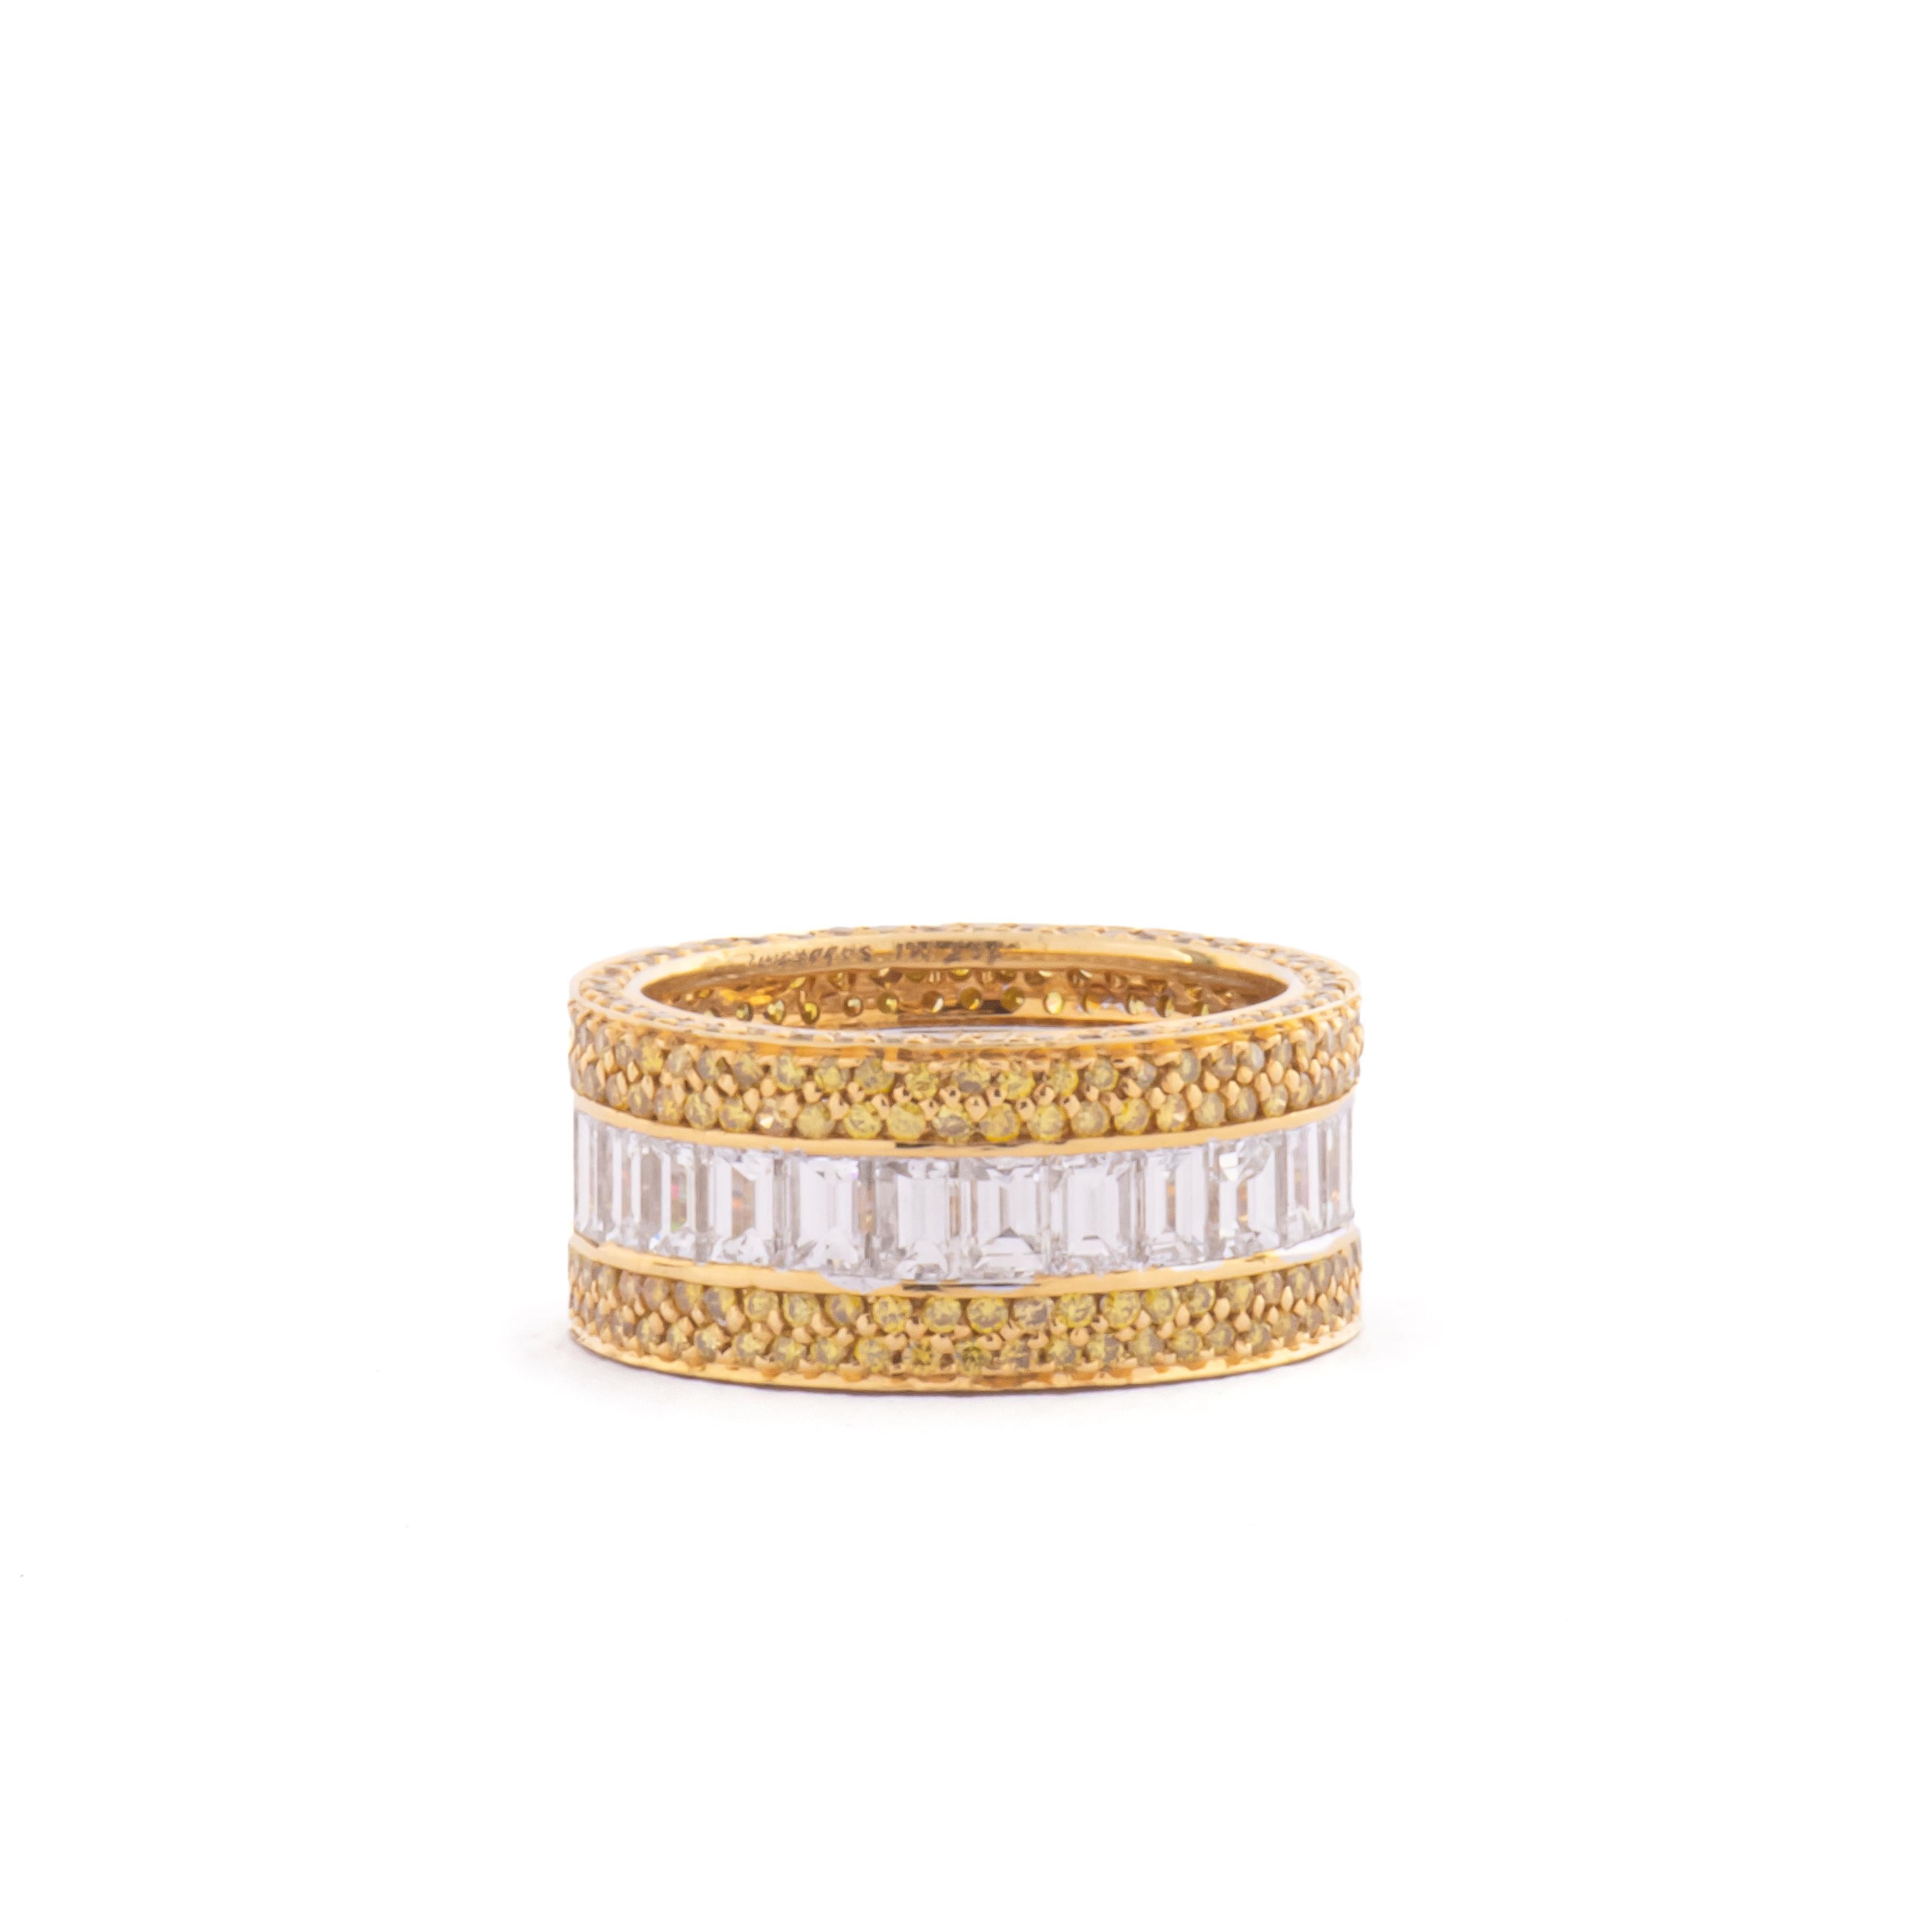 
A stunning band that shines on its own or can be stacked with other rings.
White and yellow band 18KT  gold with baguettes diamonds F/G color ct 3,76 and fancy yellow diamonds ct 1,69.
size 13,5 Italian